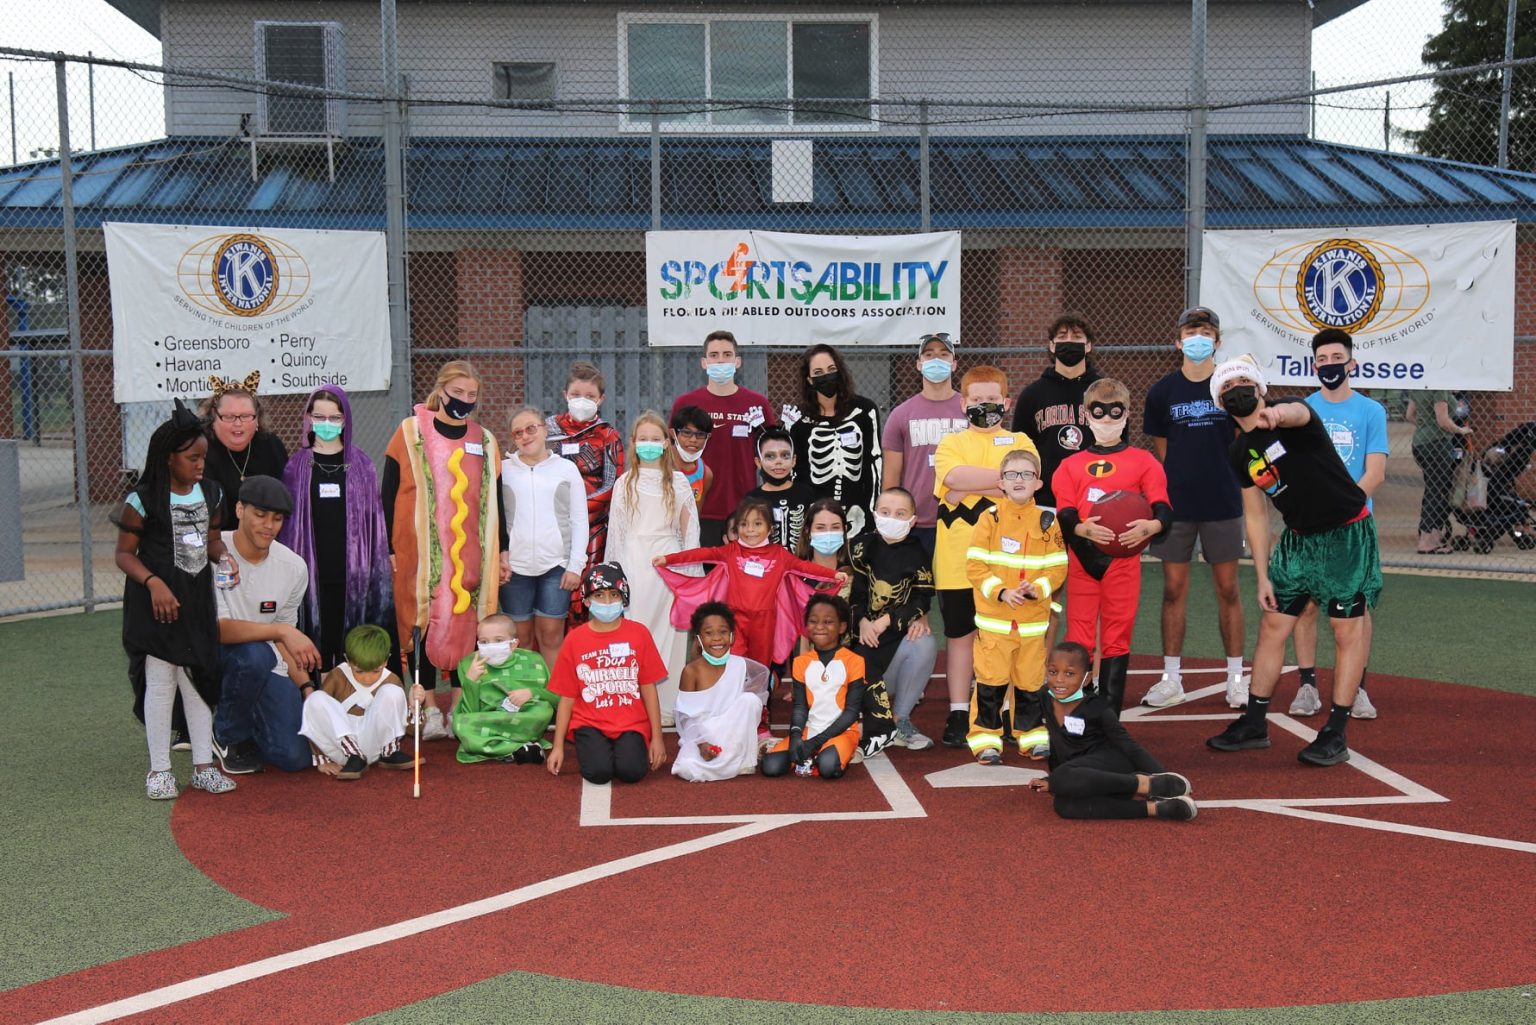 Miracle Sports Fall Costume Parade and Trick or Treating, SportsAbility